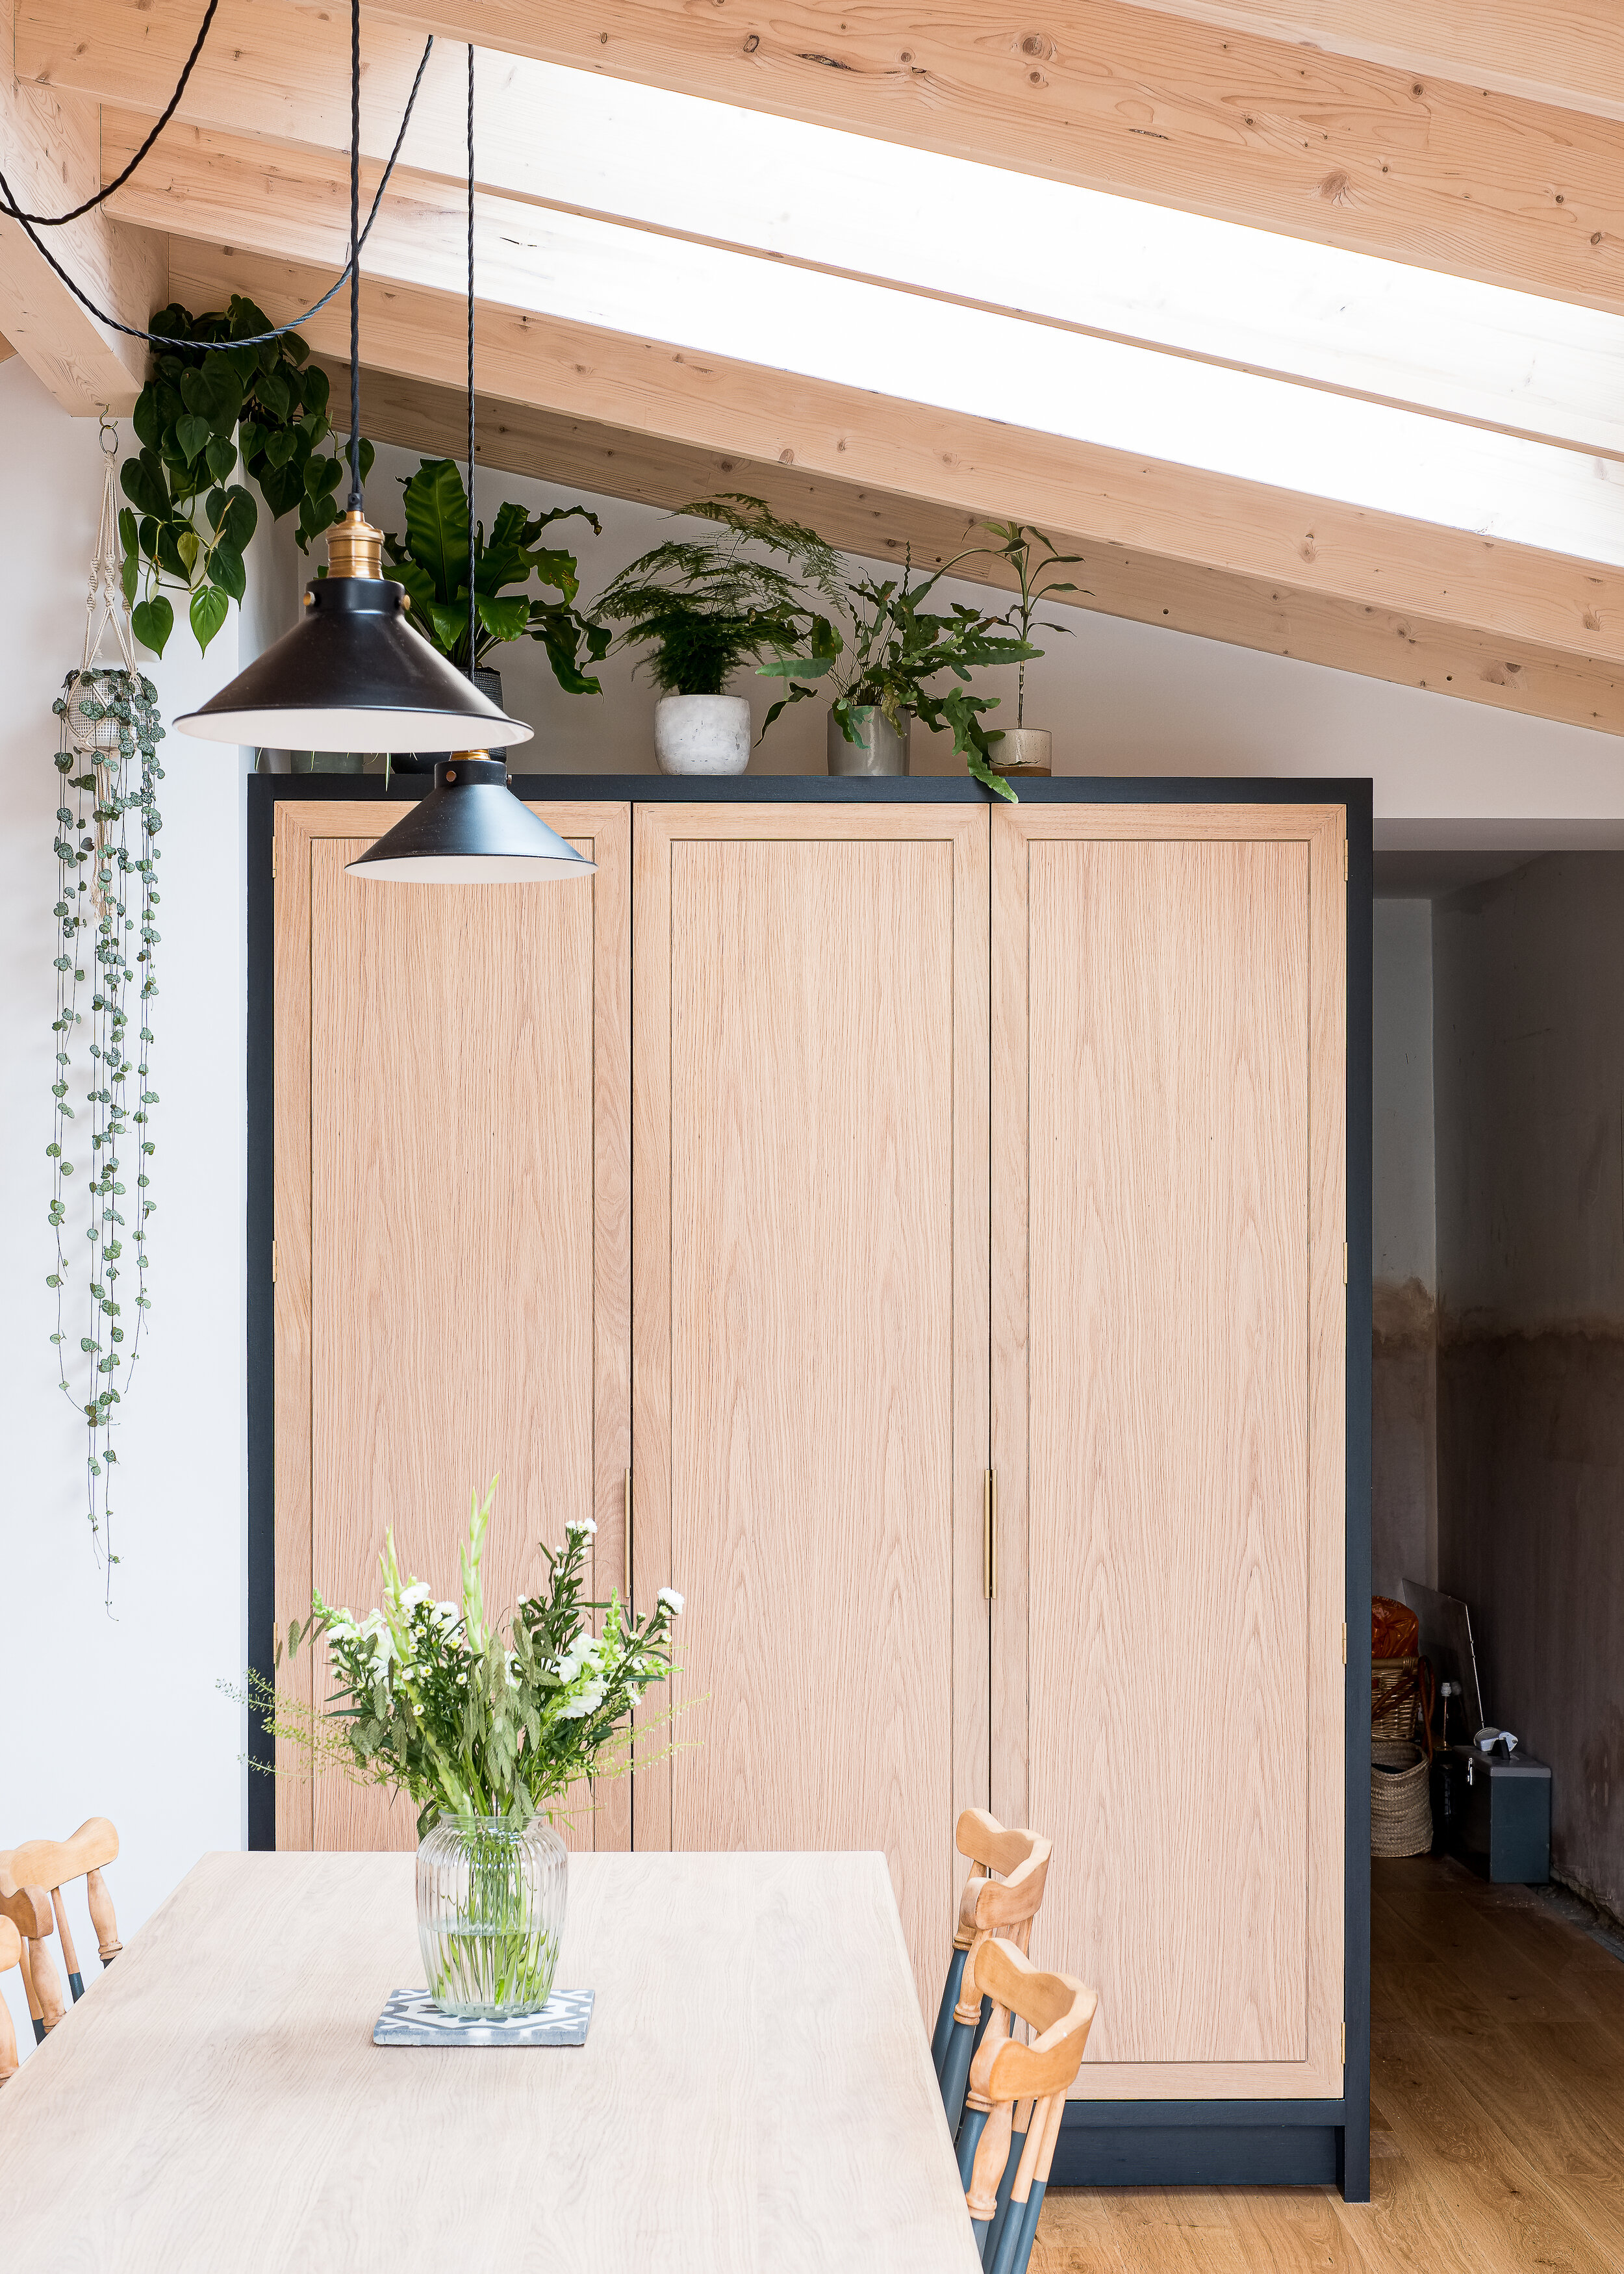 Fred+Howarth+Photography_Cabinet+Makers+House_06.jpg